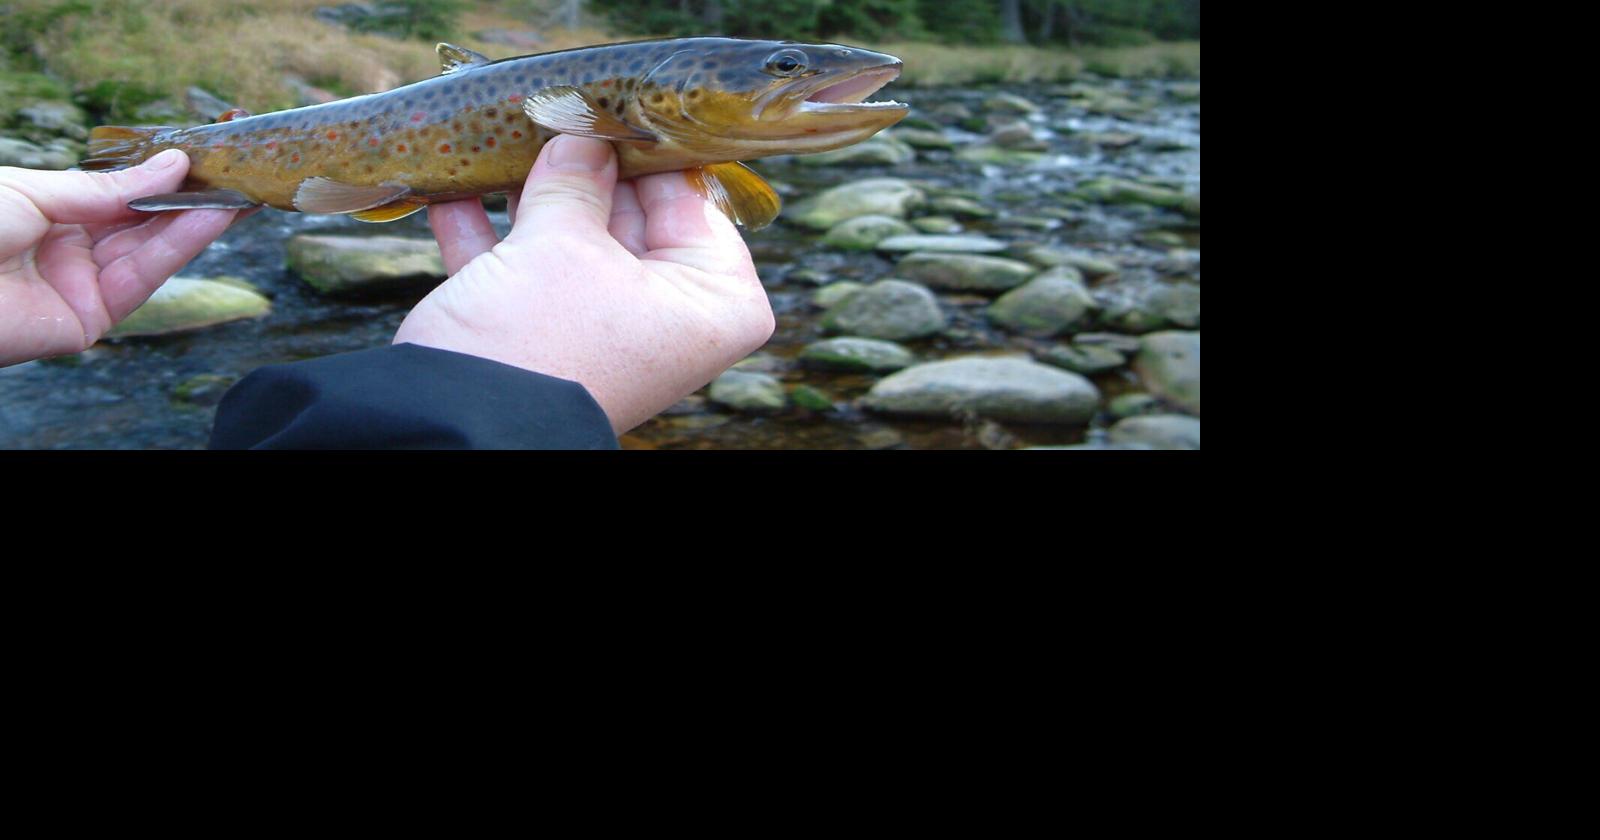 Parasite harmful trout found in northern Wisconsin stream